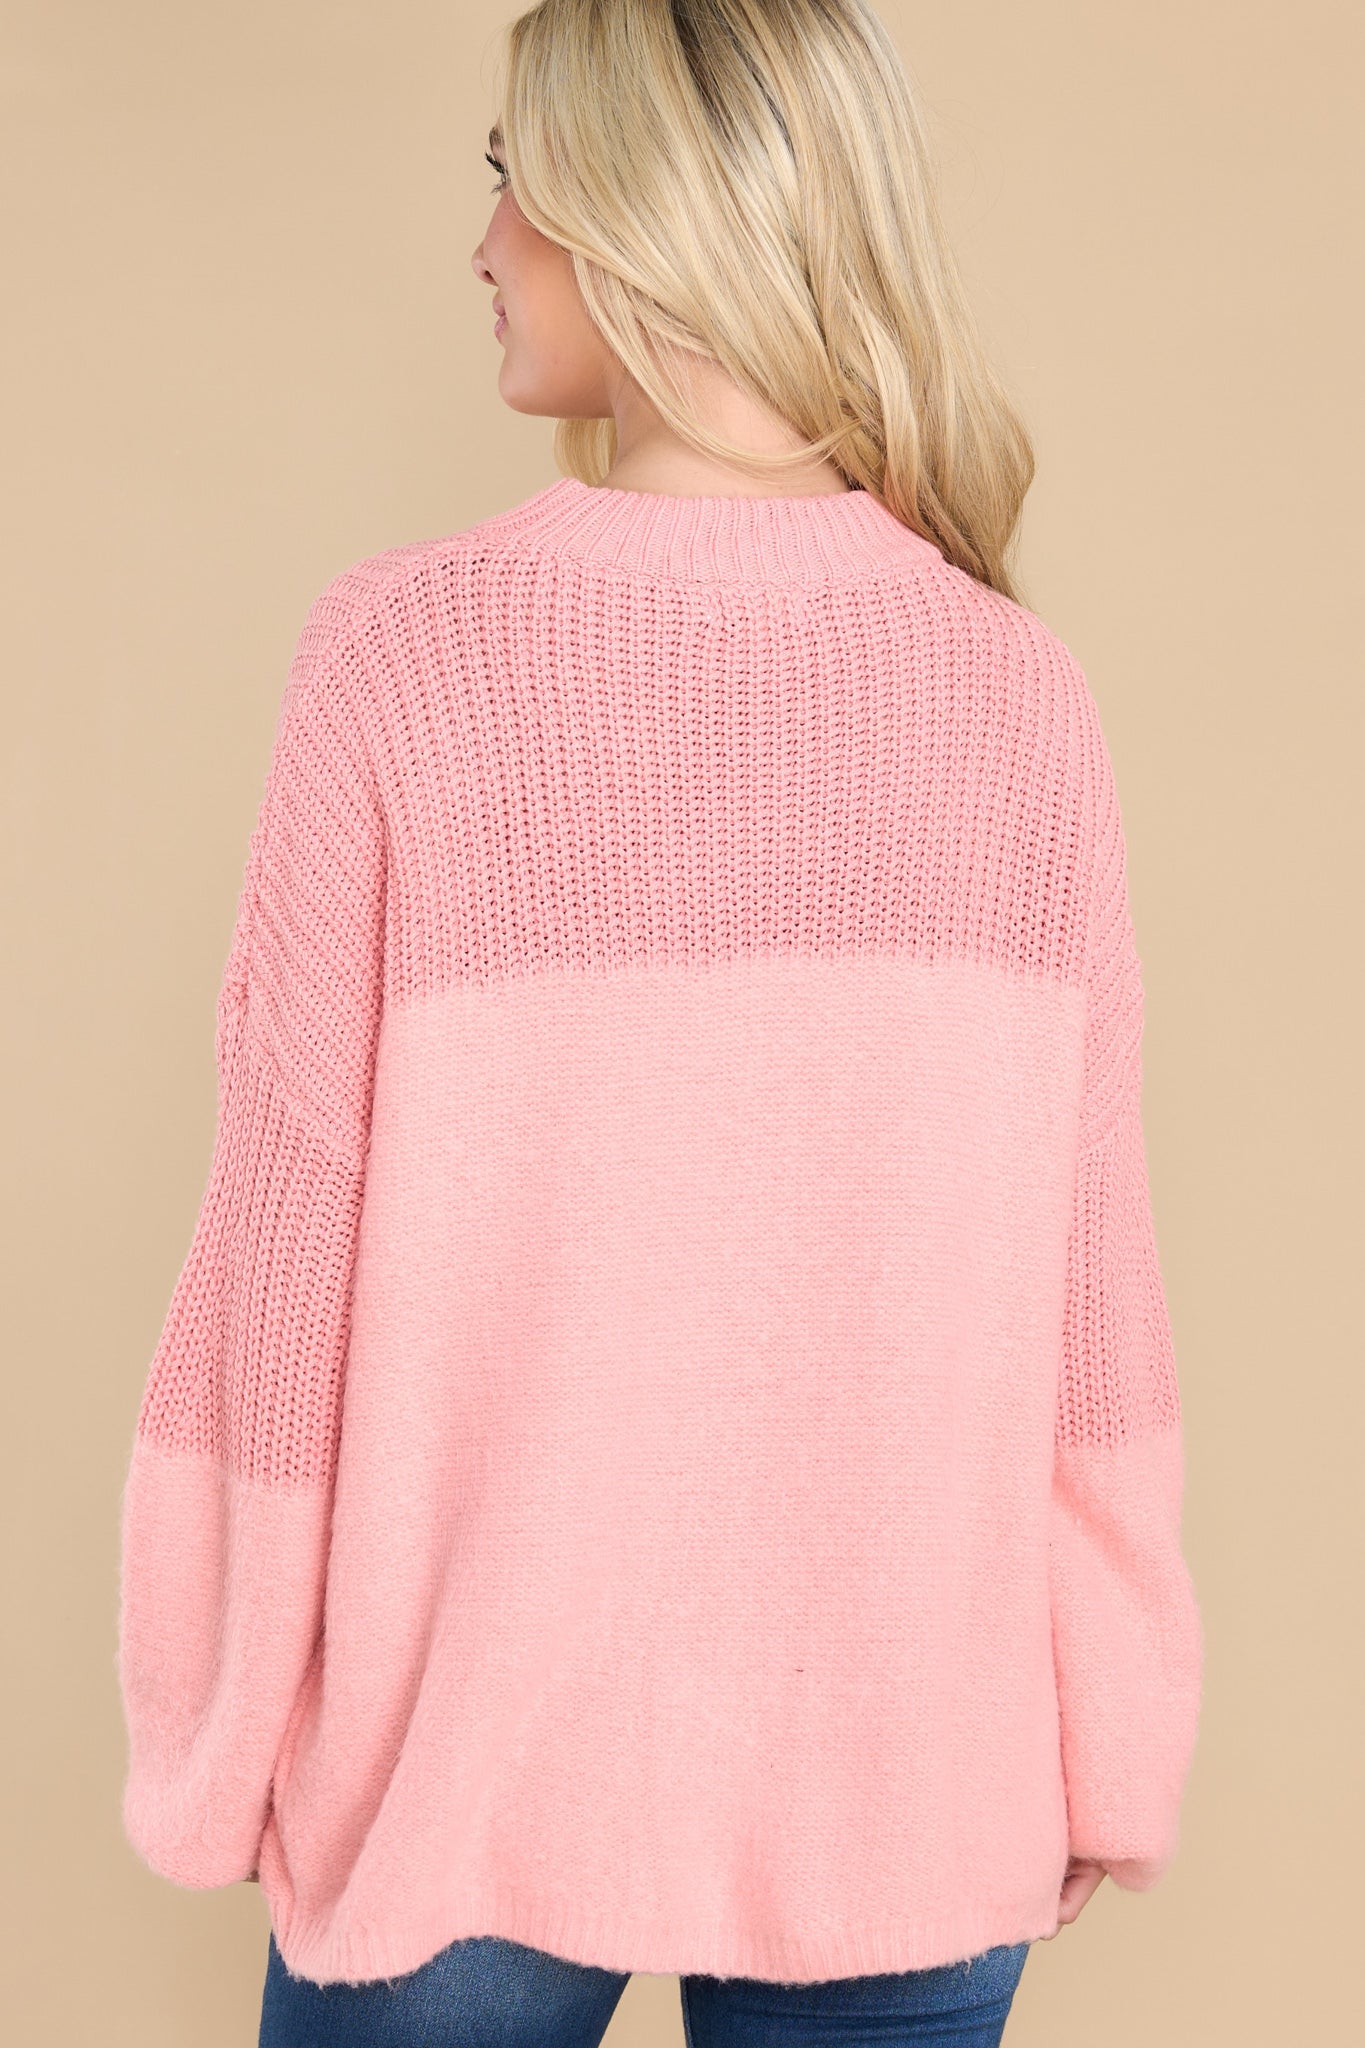 Homebody At Heart Light Pink Sweater - Red Dress